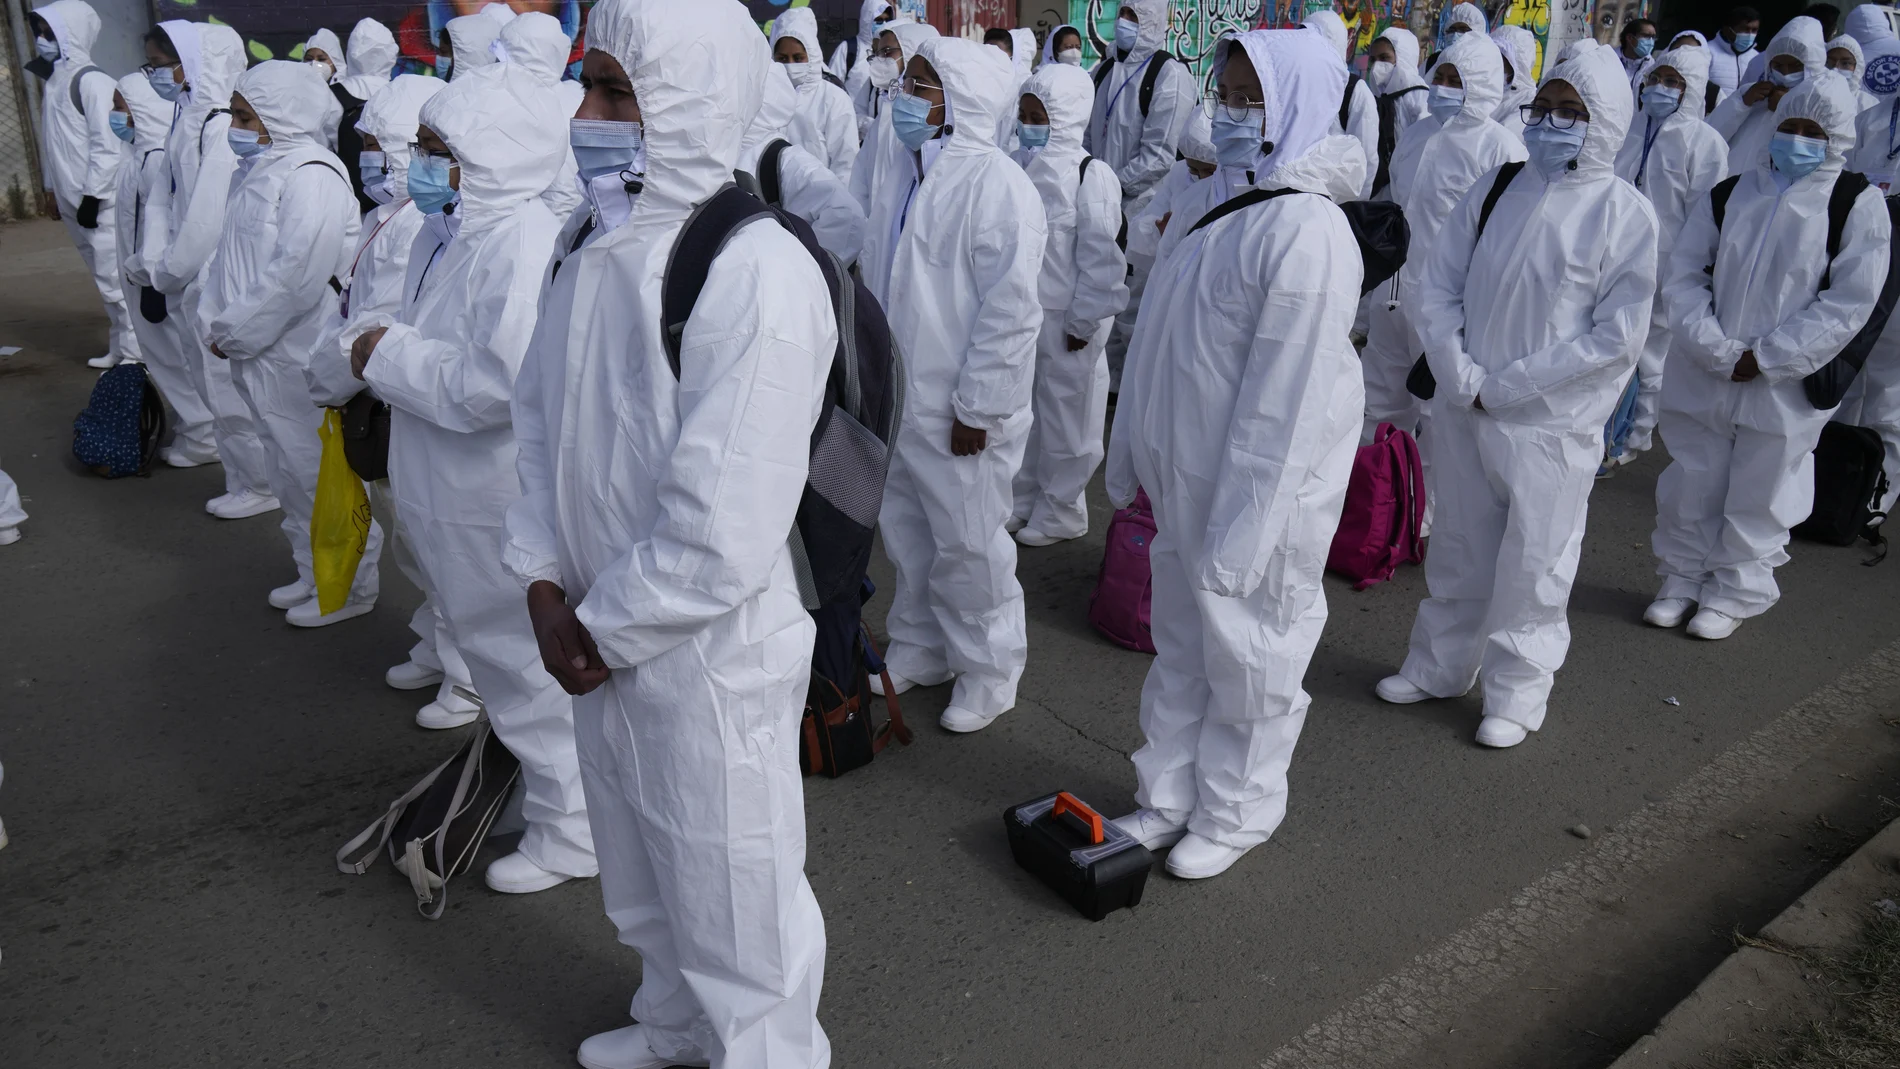 Healthcare workers take part in a ceremony kicking off a door-to-door COVID-19 vaccination campaign, in El Alto, Bolivia, Thursday, Sept. 16, 2021. (AP Photo/Juan Karita)